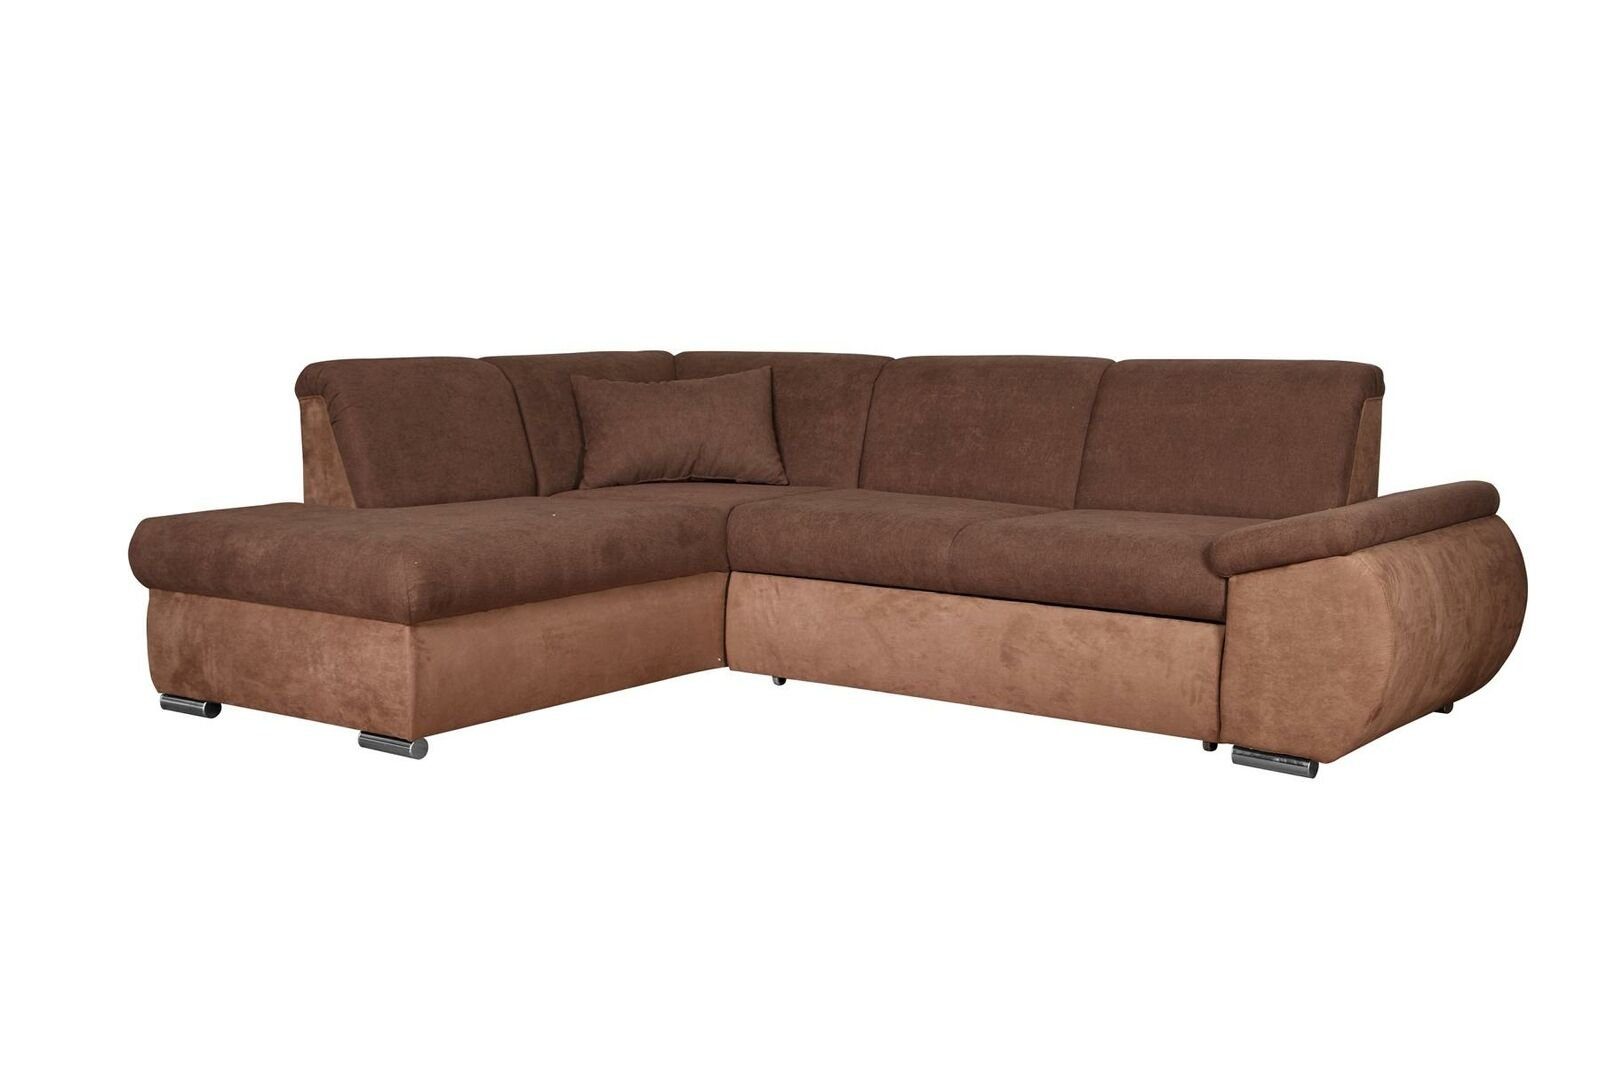 JVmoebel Sofa Braunes Stoff Ecksofa L-Form mit Bettfunktion Sofa Couch Design Couch, Made in Europe